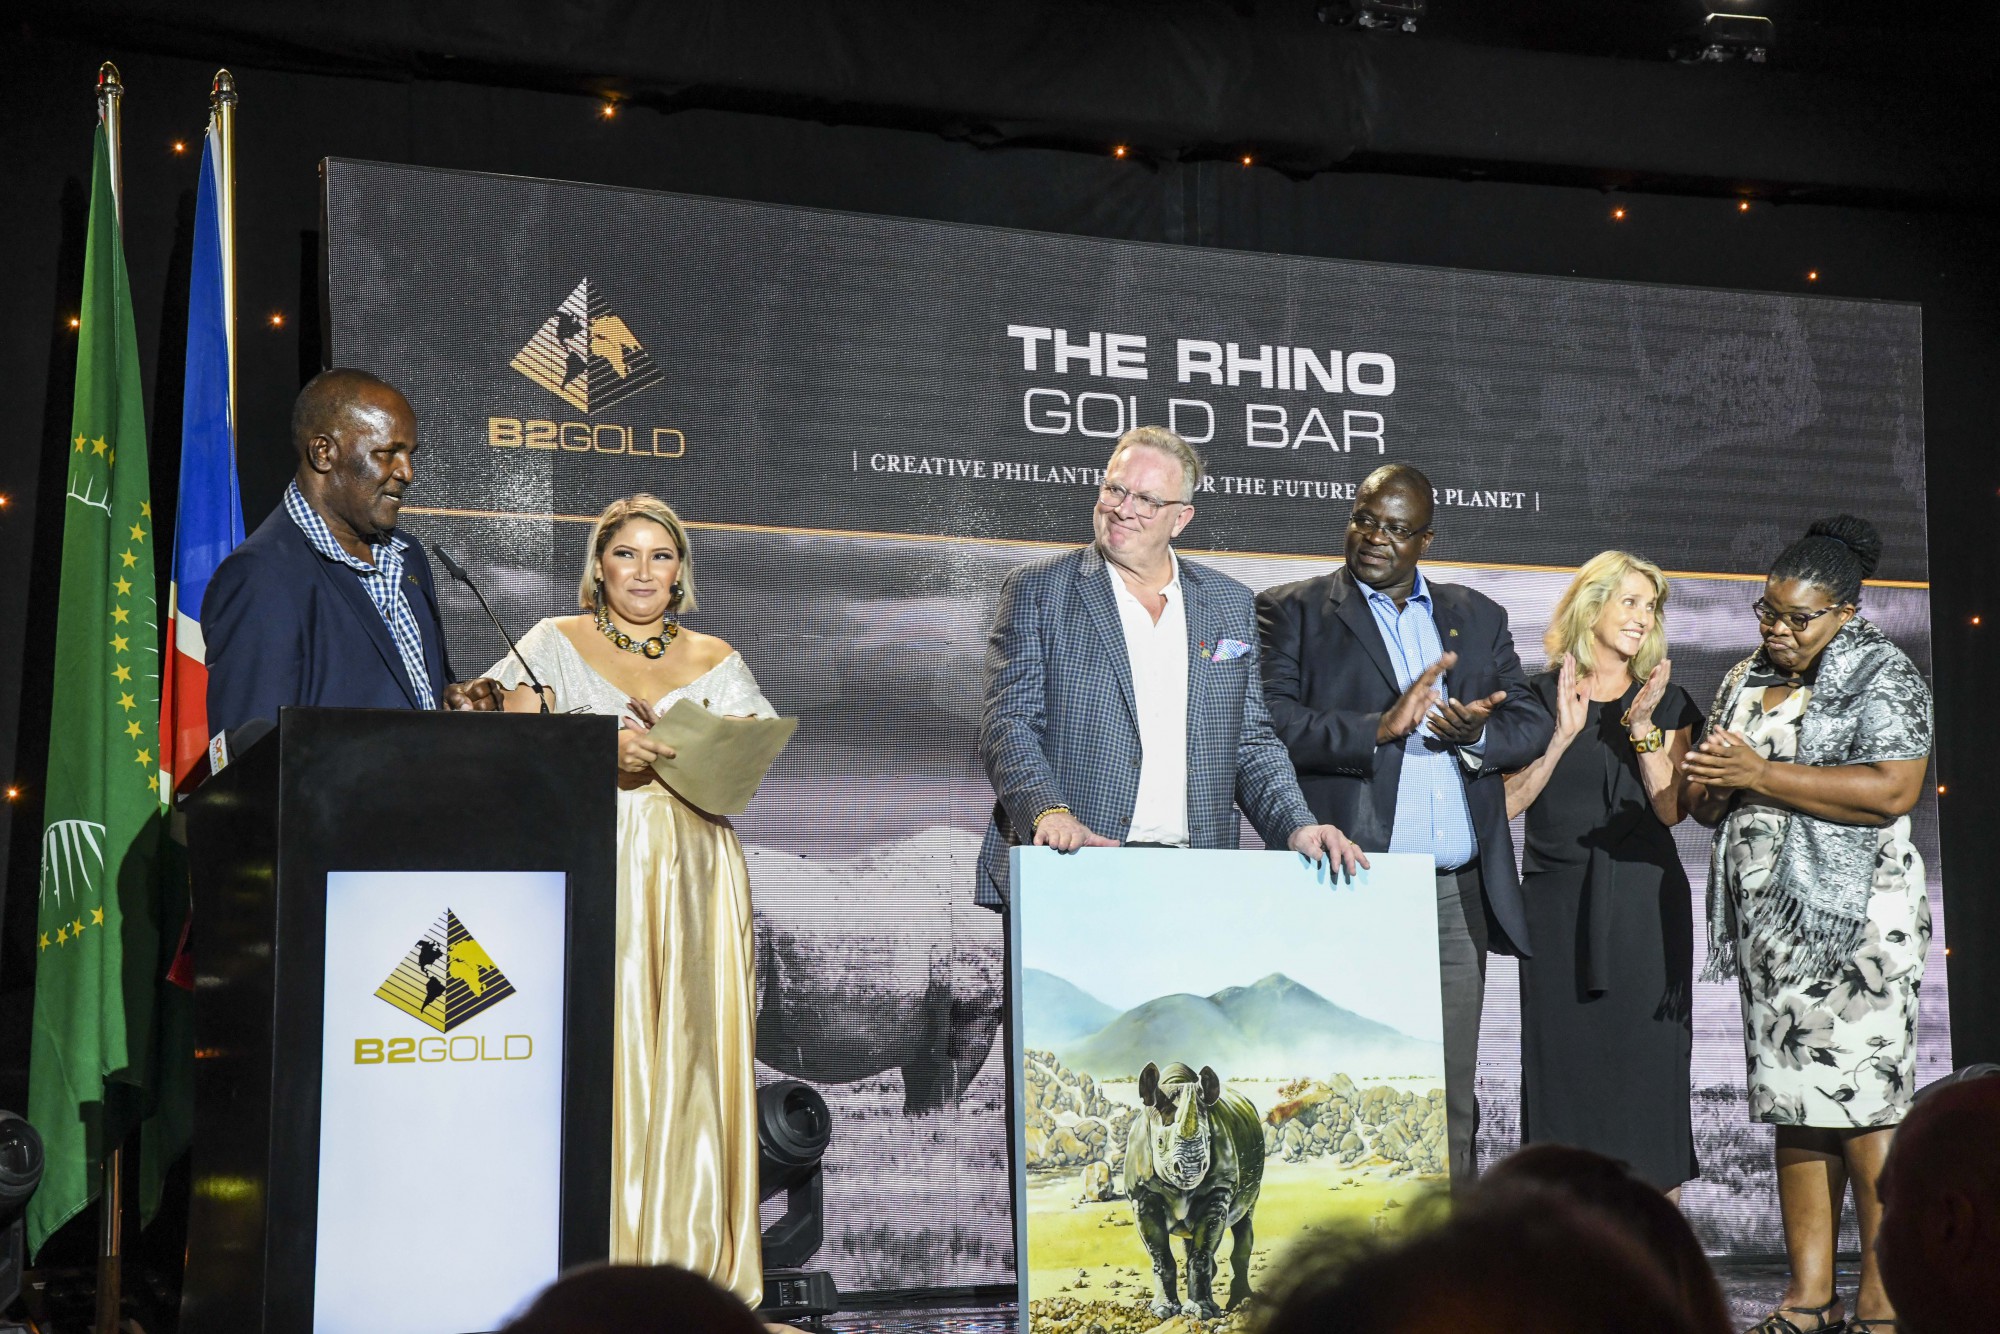 Members of Save the Rhino Trust and integrated rural development and nature conservation present a token of their appreciation to Clive Johnson. From left to right: Simson Uri-Khob, Clive Johnson, John Kasaona, Ginger Mauney, and Maxi Louis.